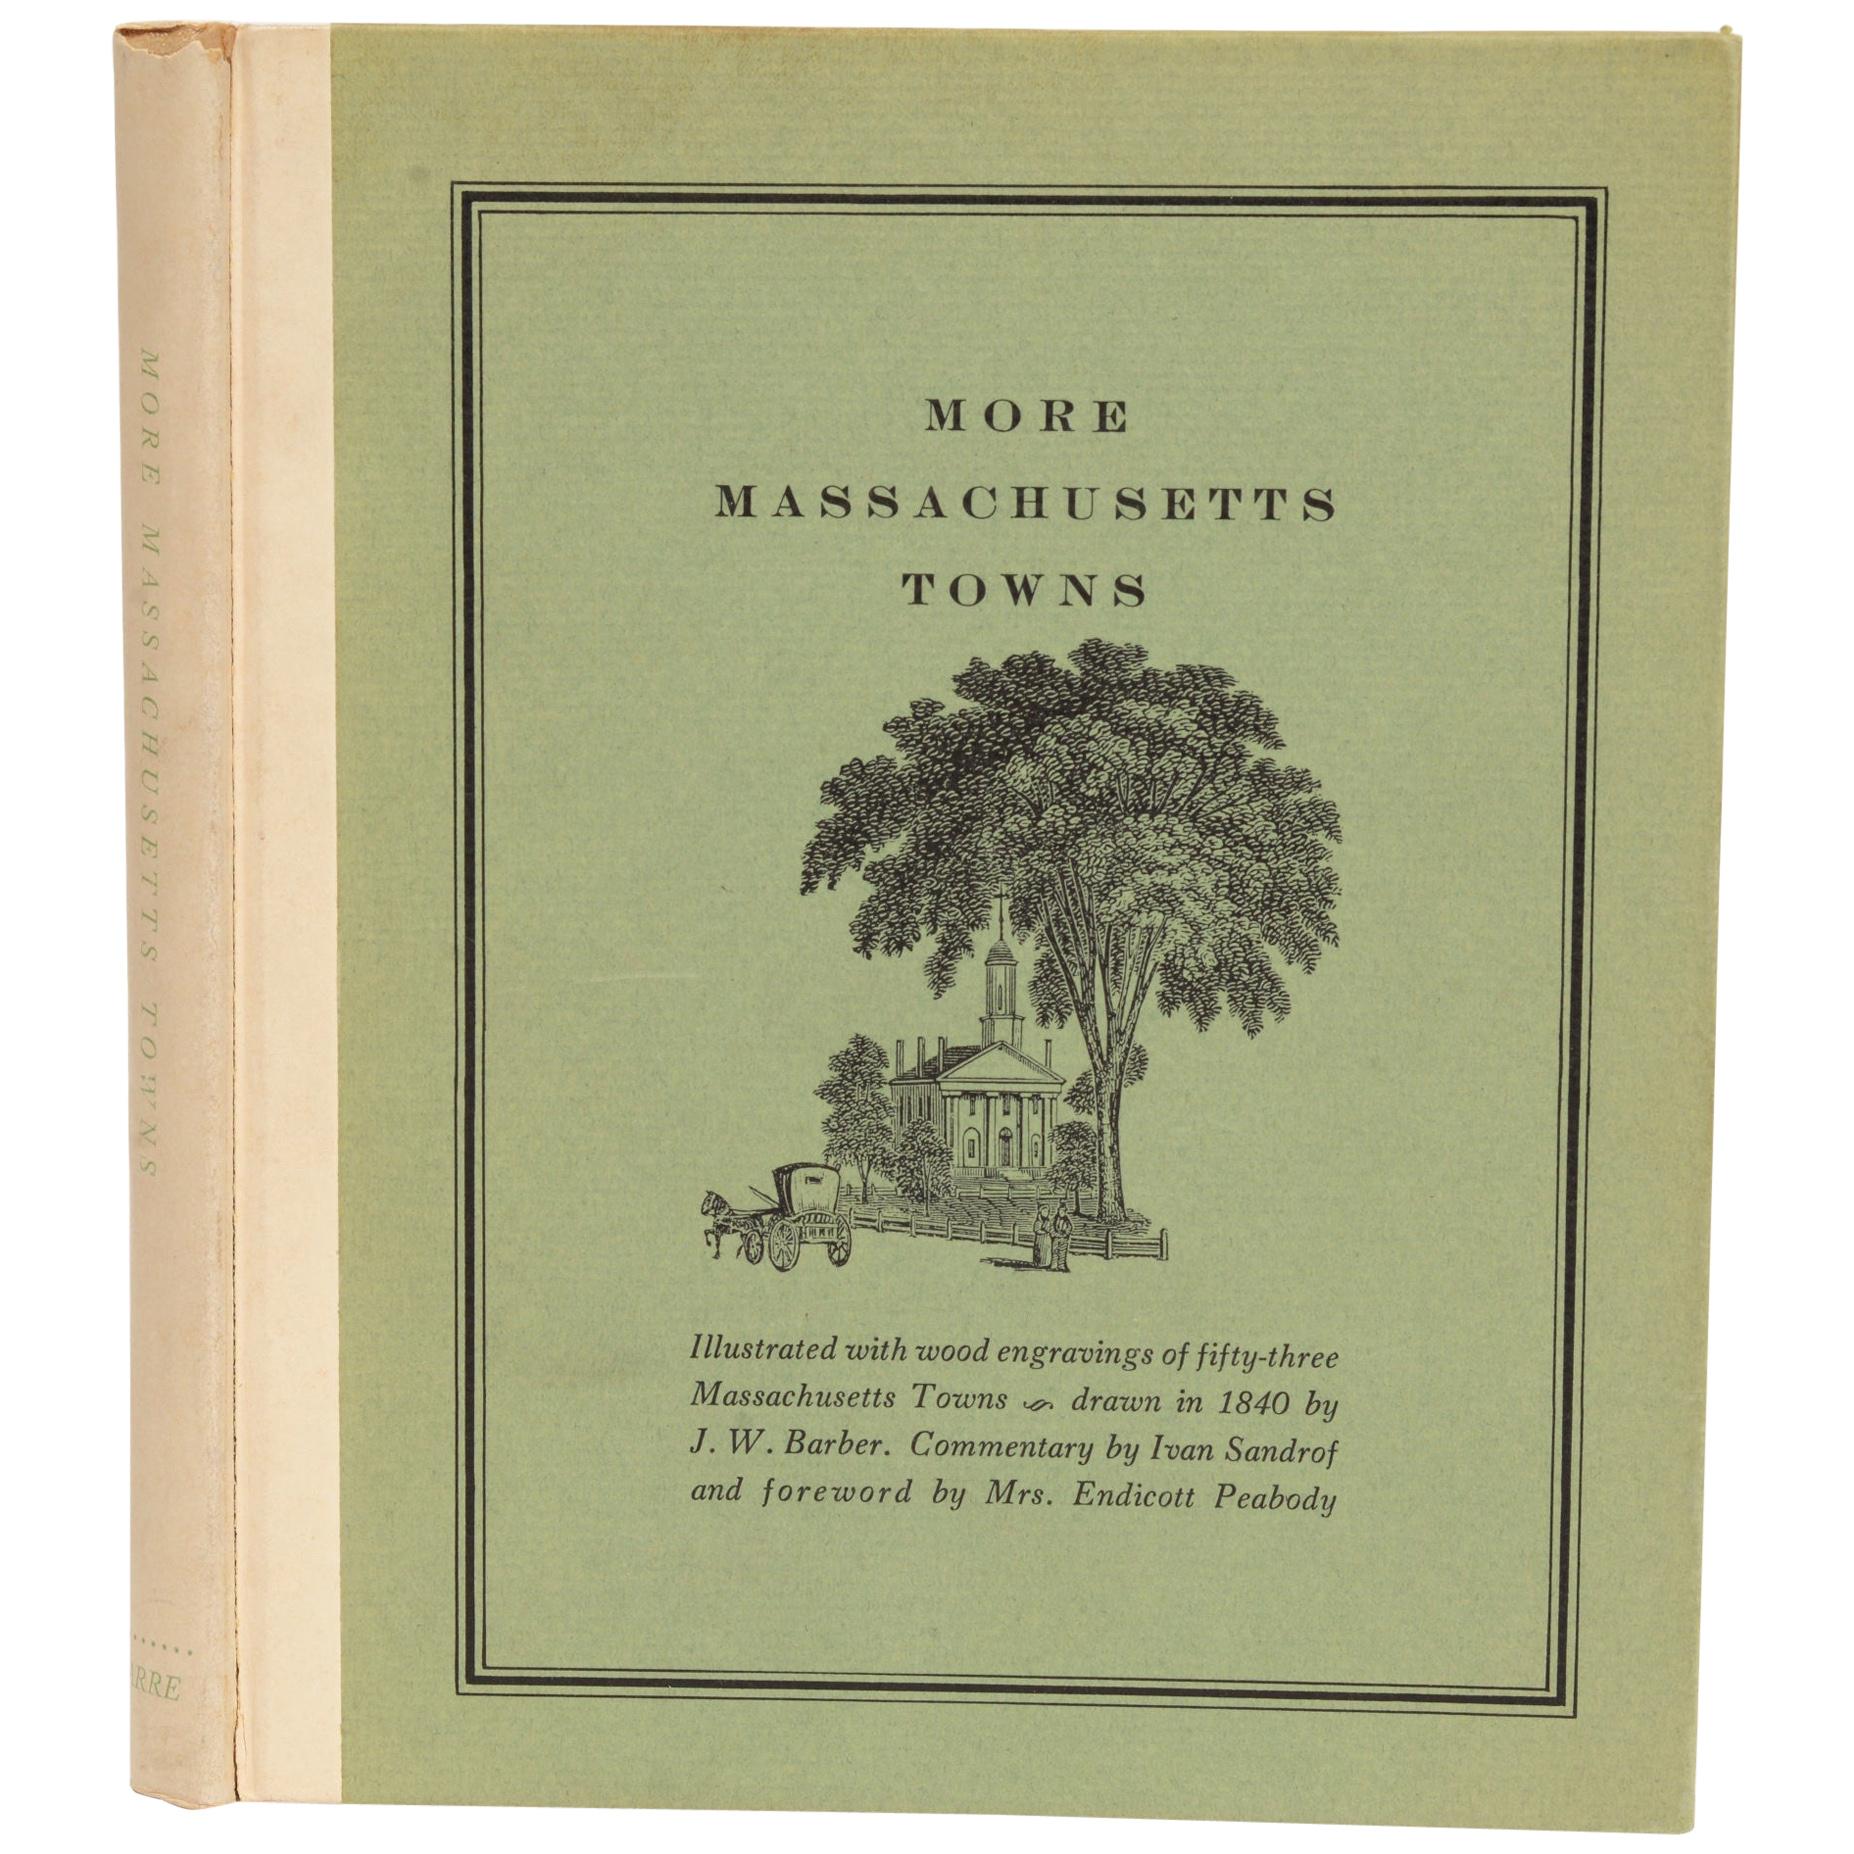 More Massachusetts Towns, Illustrated with Wood Engravings of 53 Mass. Towns